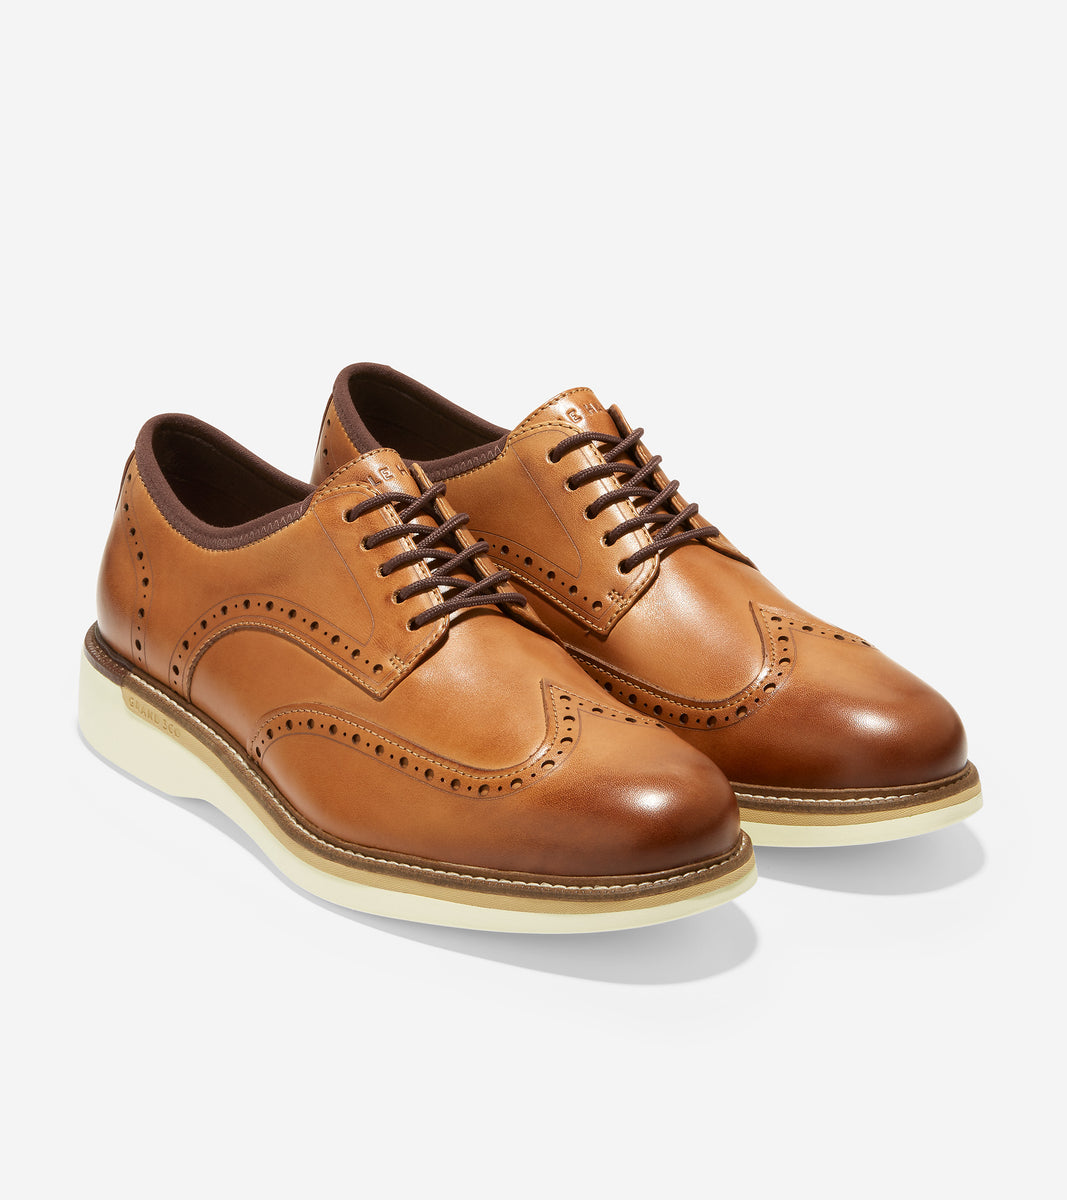 Grand Ambition Wingtip Oxford